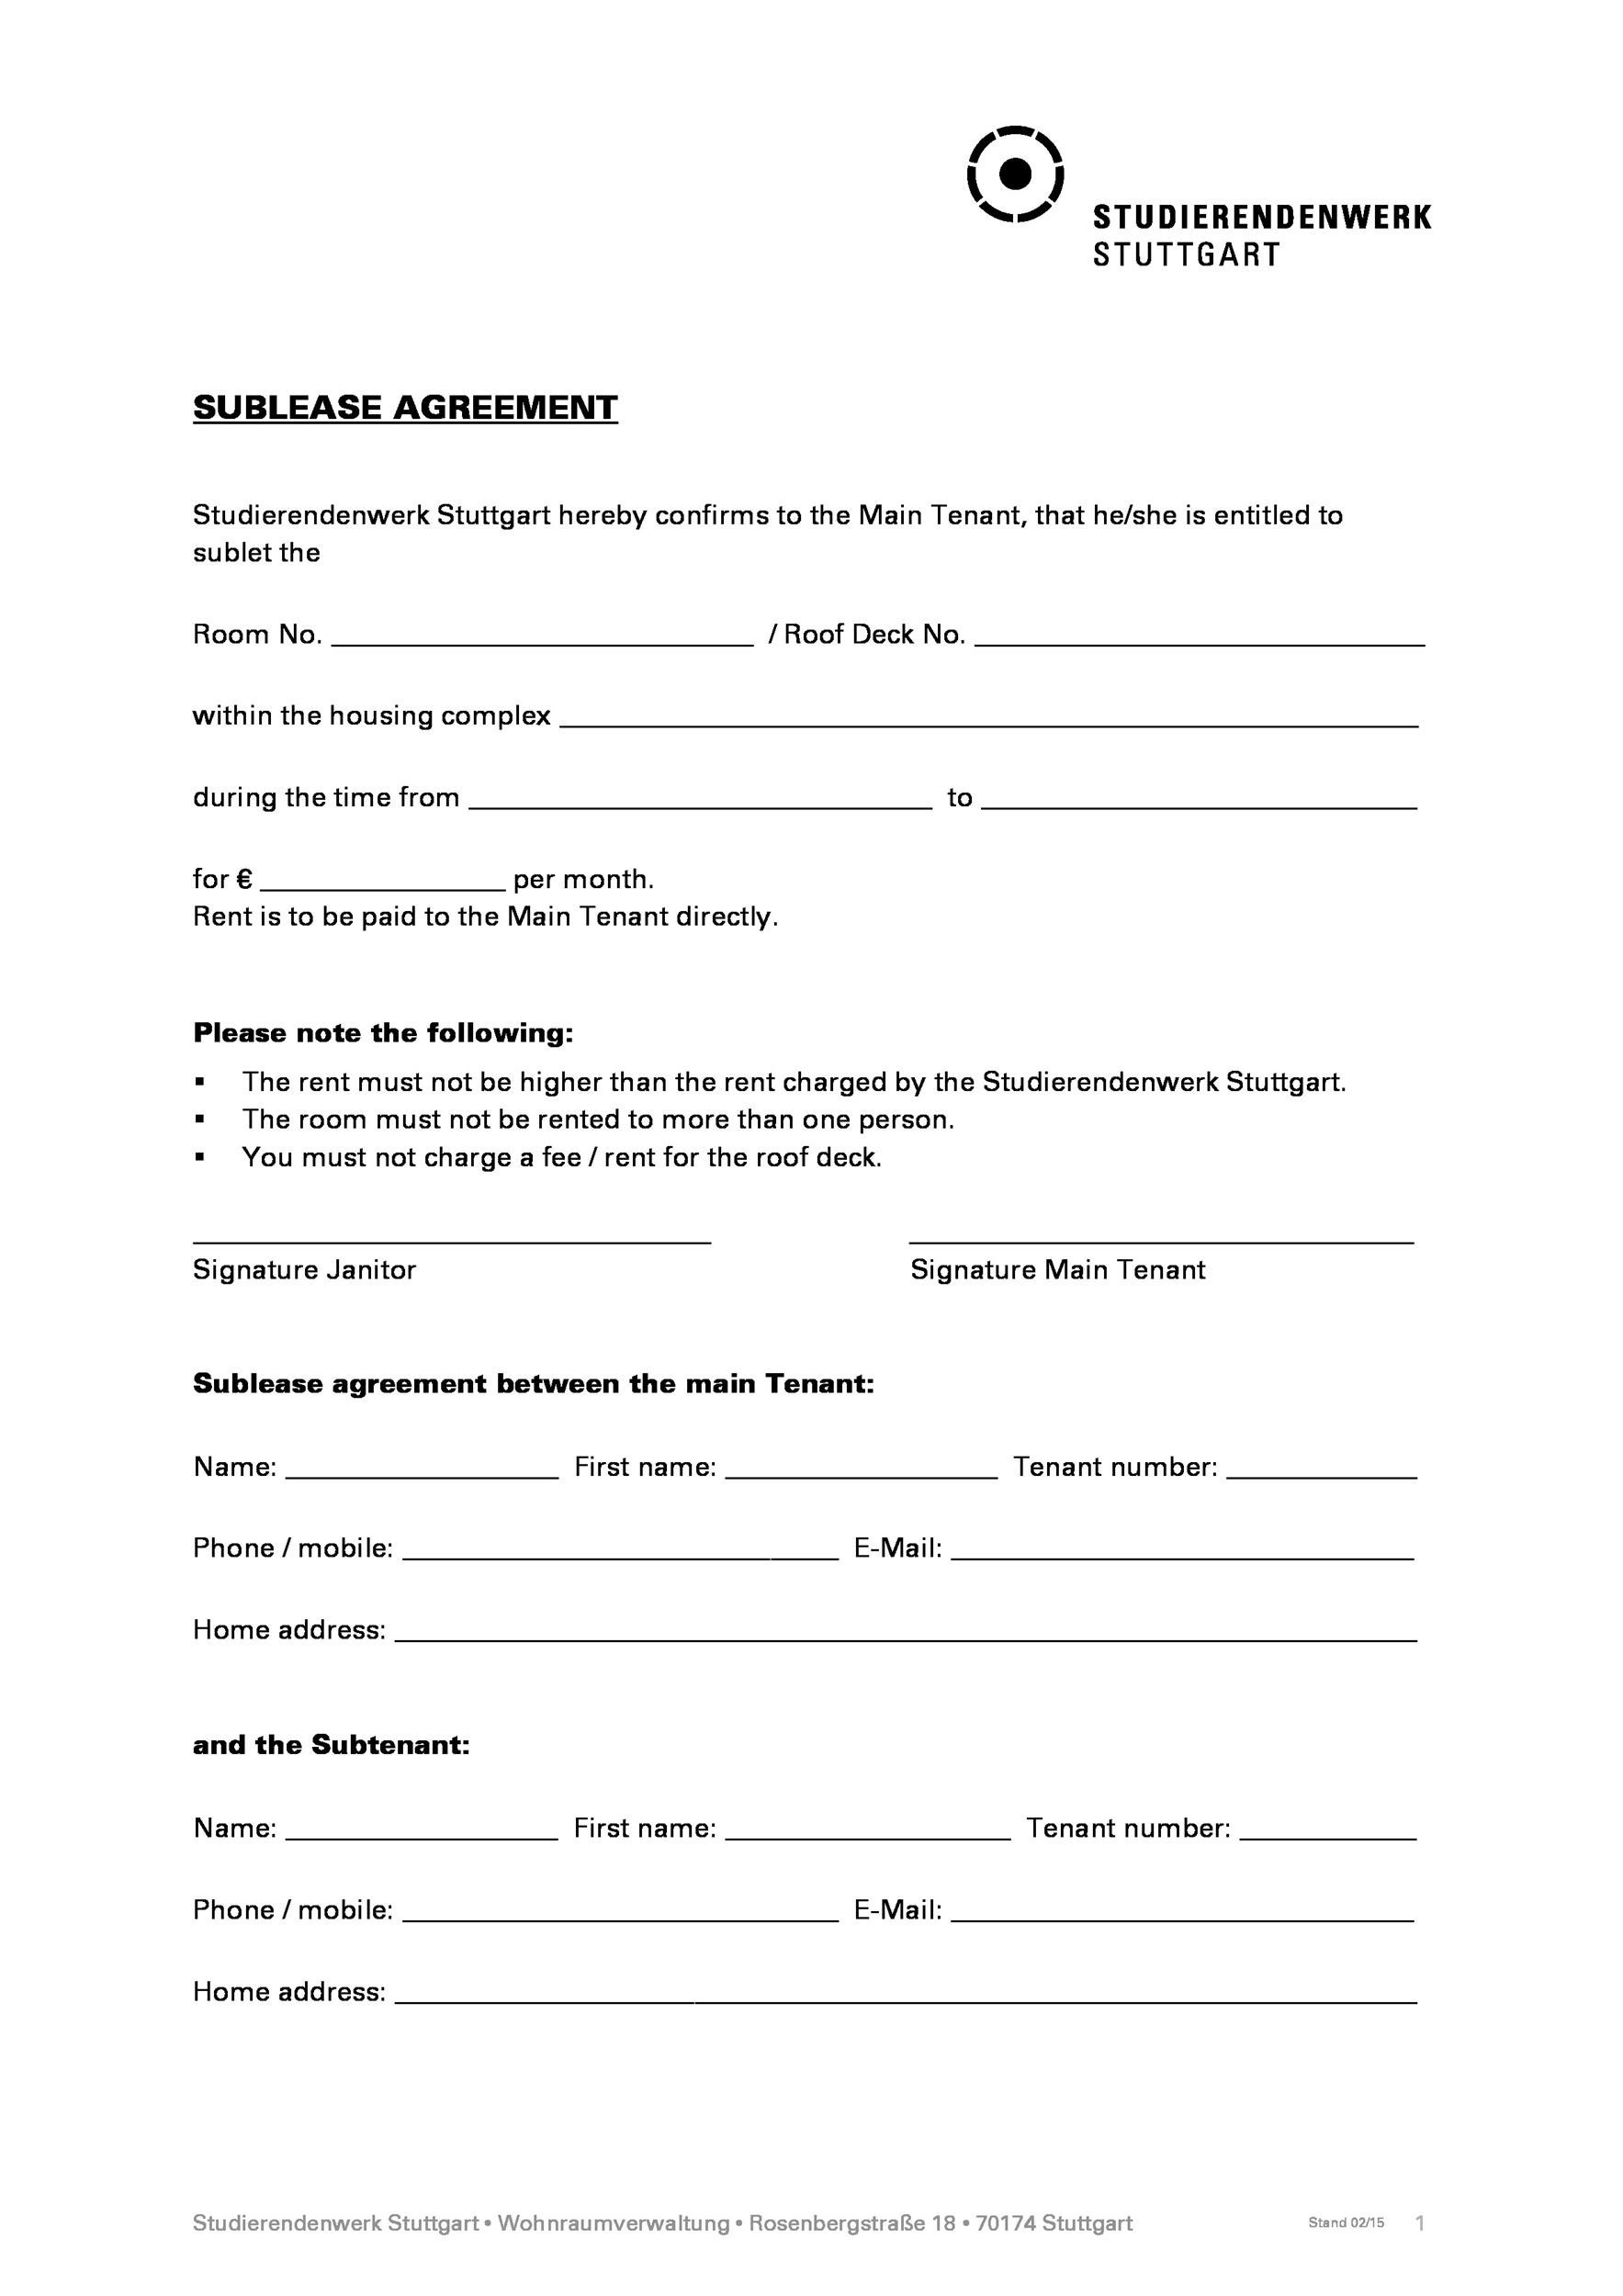 40-professional-sublease-agreement-templates-forms-template-lab